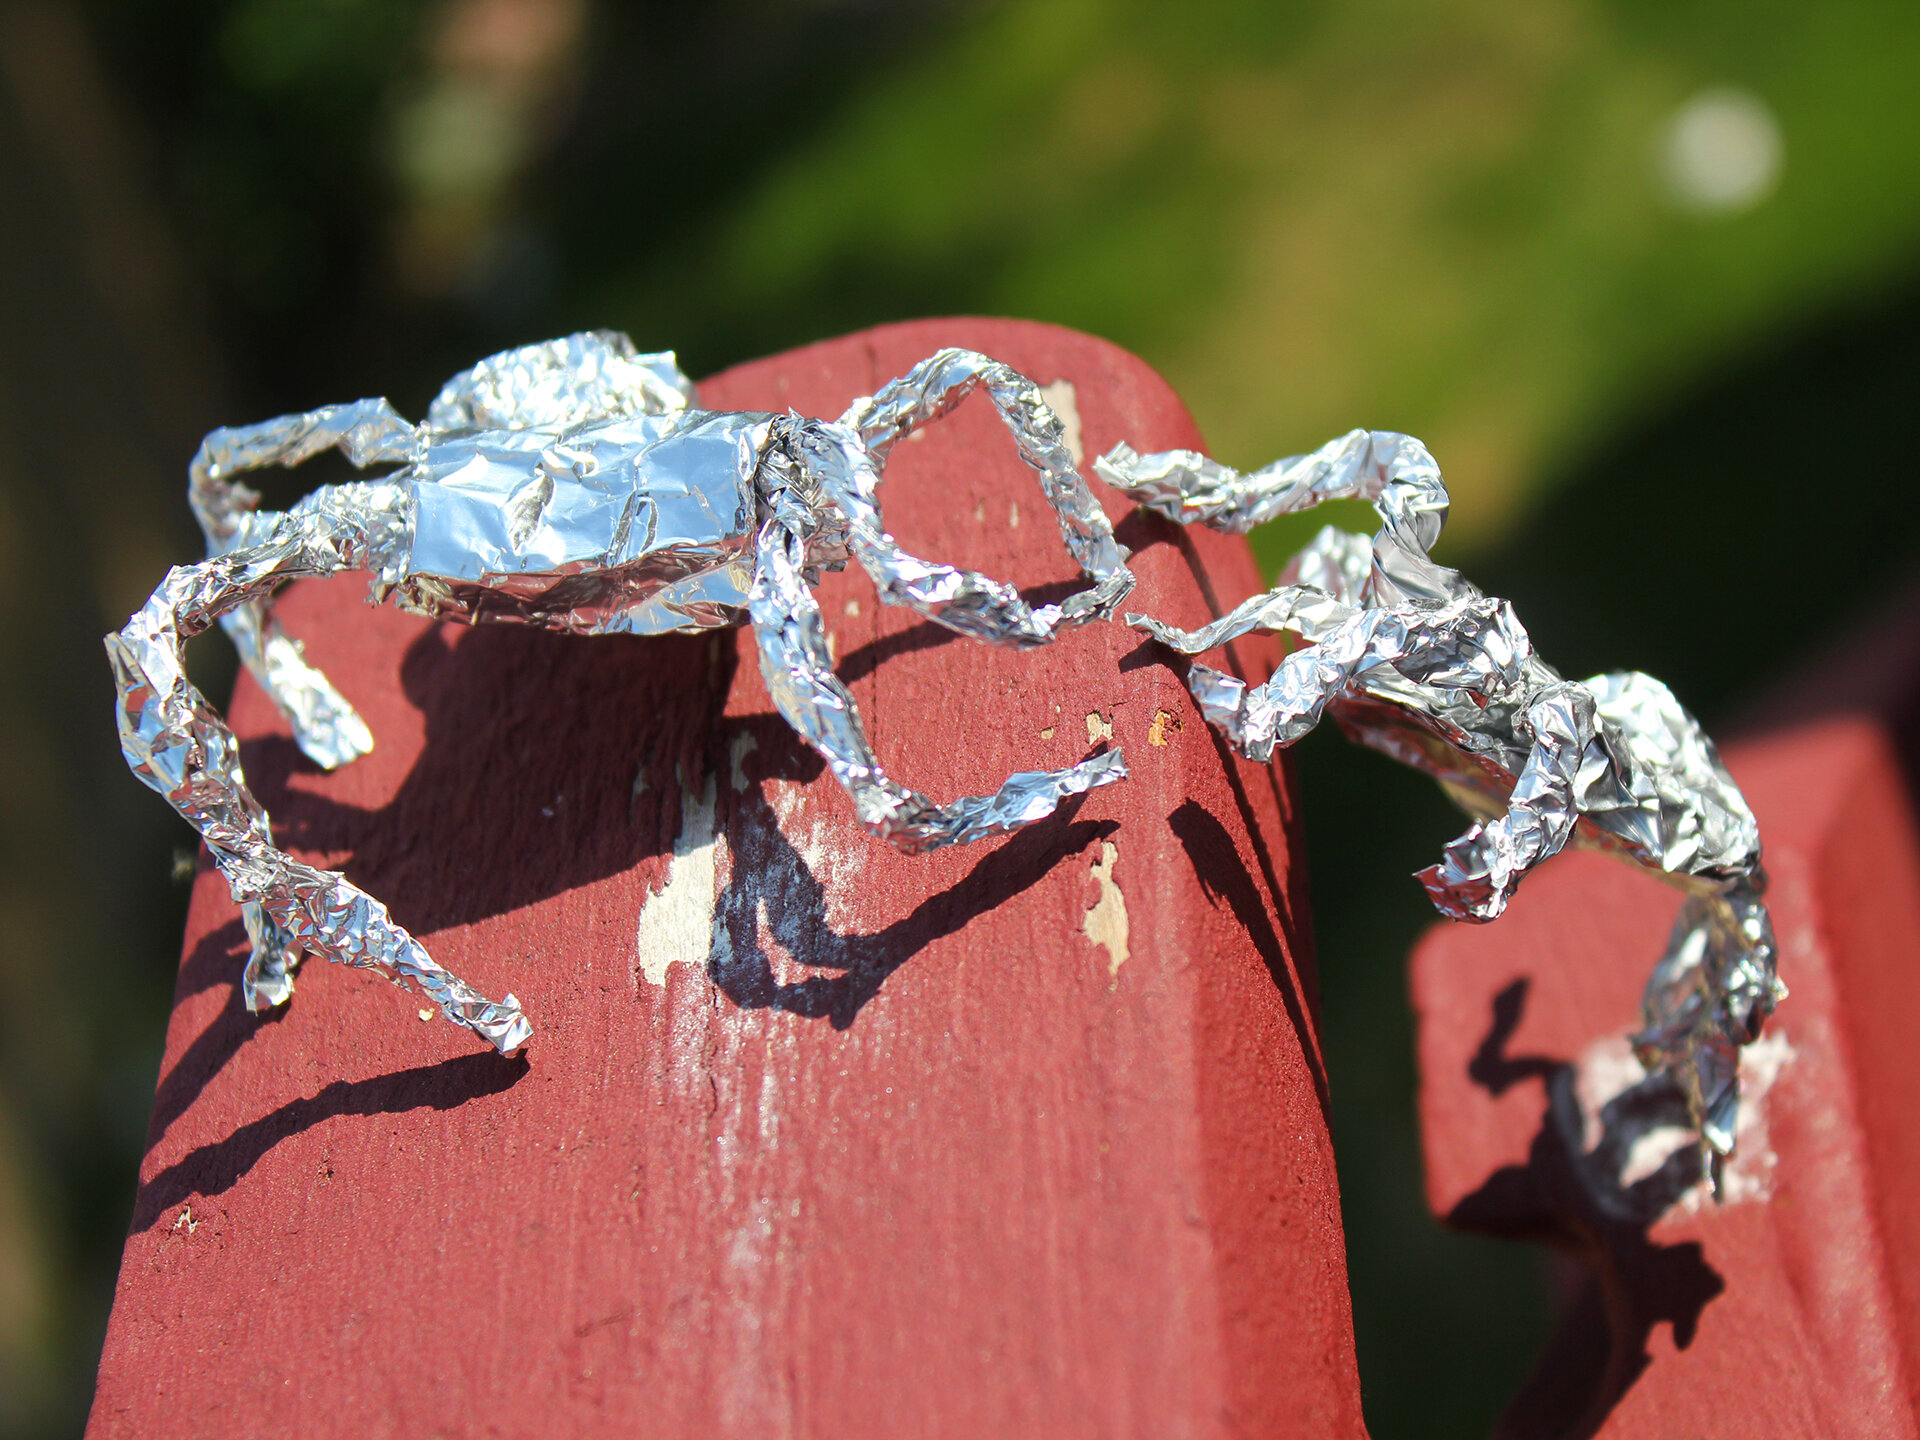 Two Tin Foil Spiders Climbing Railing